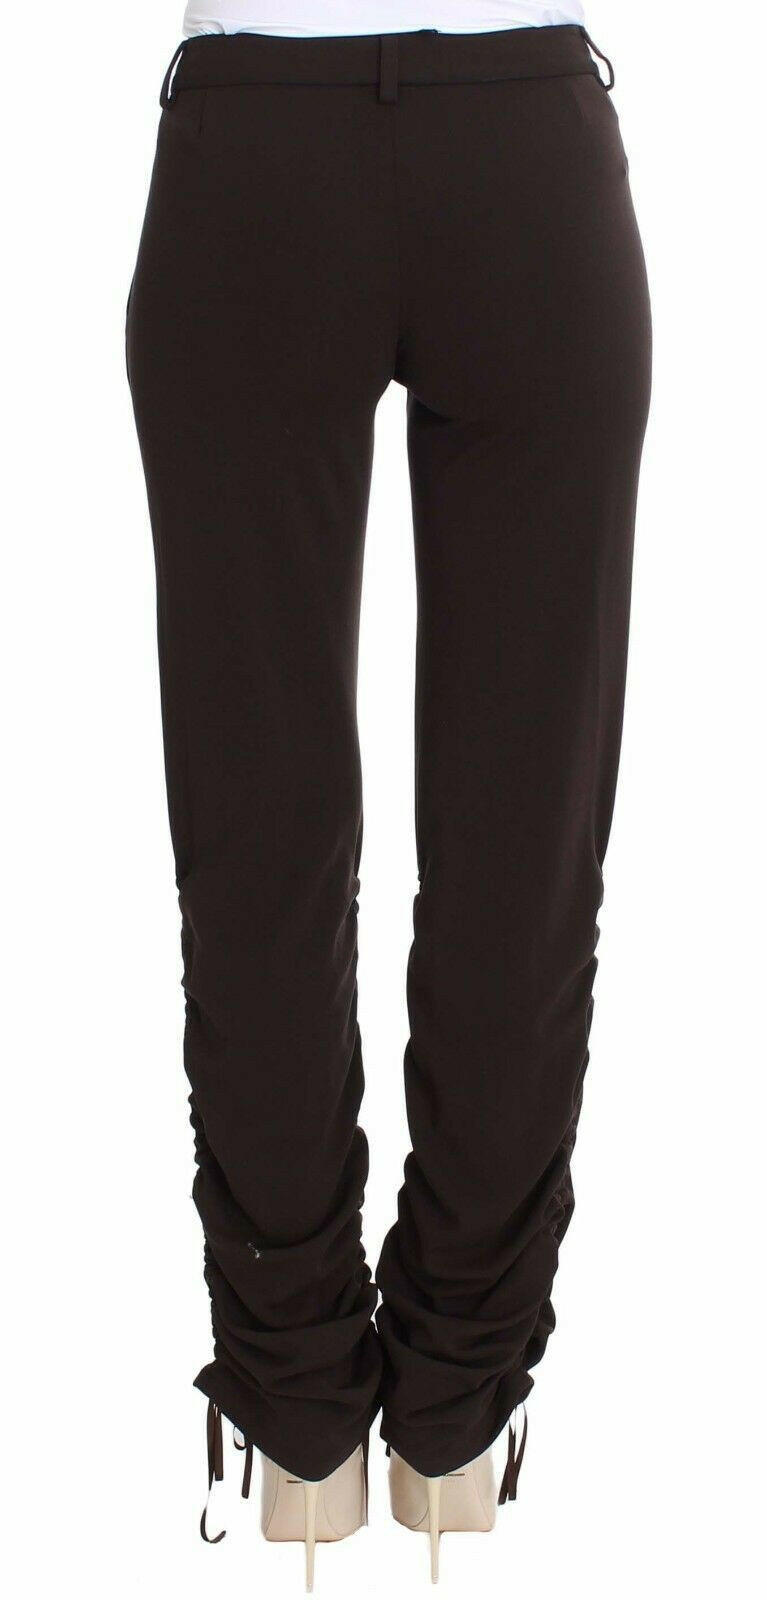 Ermanno Scervino Brown Stretch Casual Trousers Pants - GENUINE AUTHENTIC BRAND LLC  